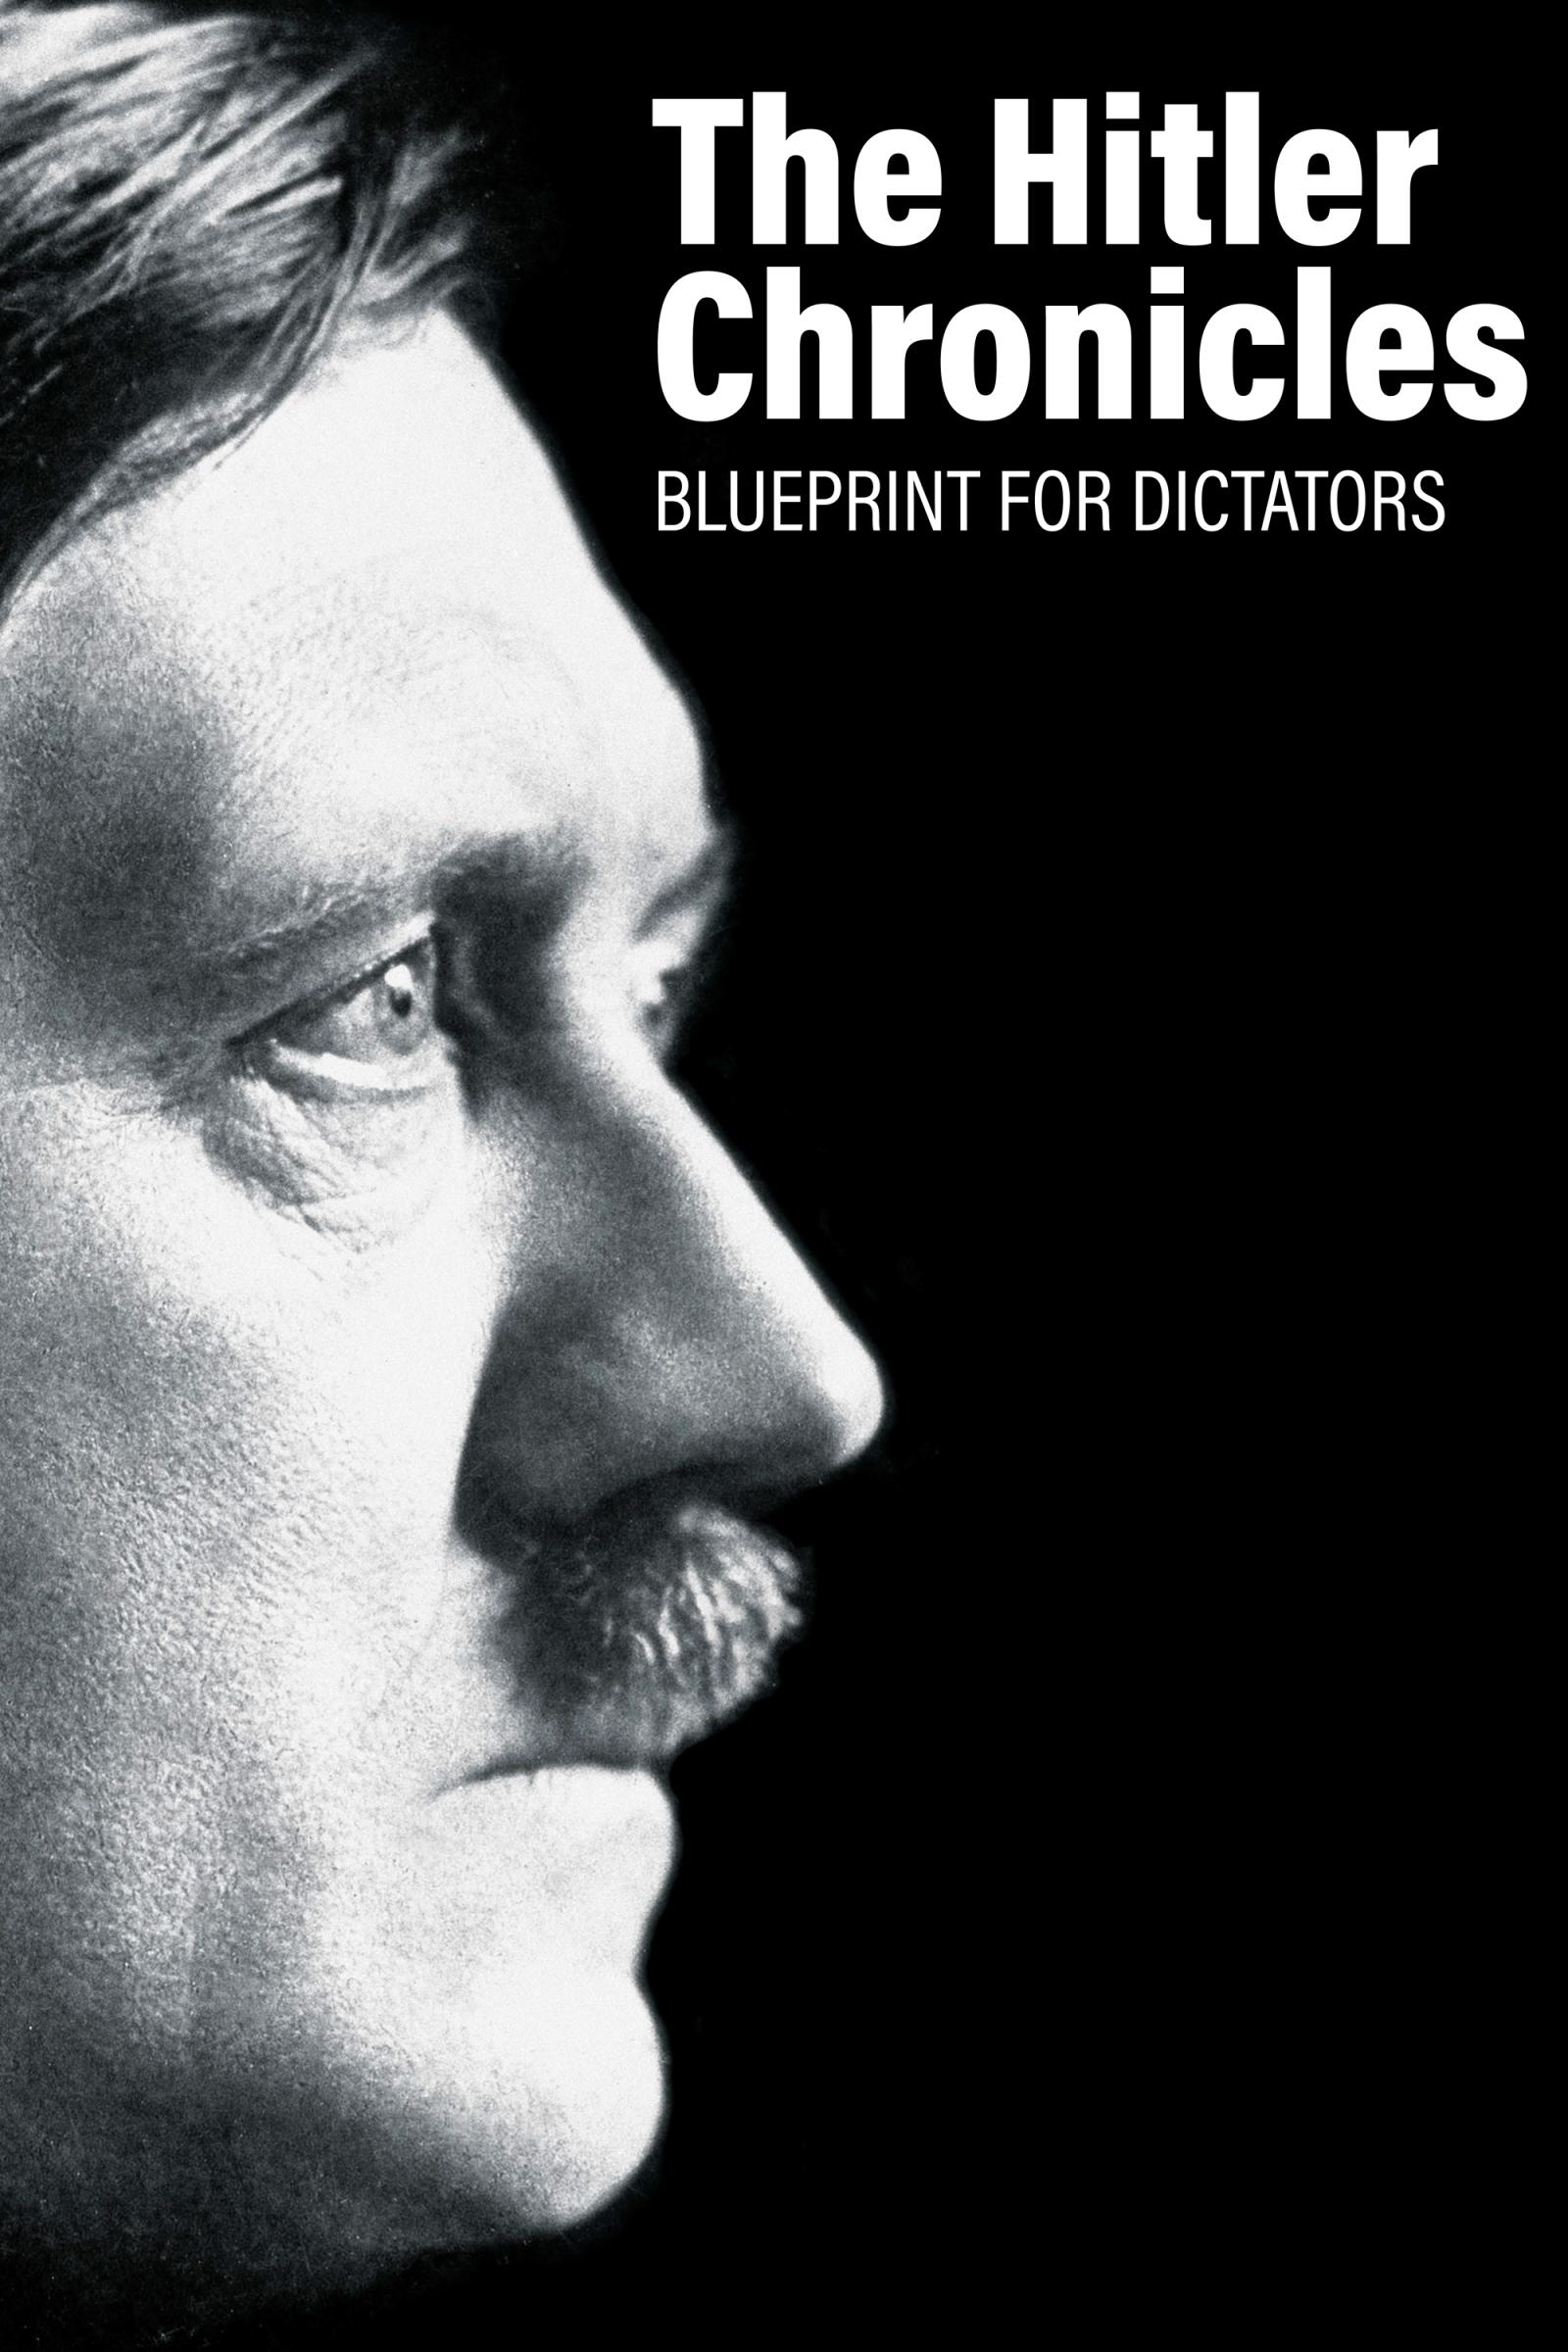 Where to stream The Hitler Chronicles - Blueprint for Dictators